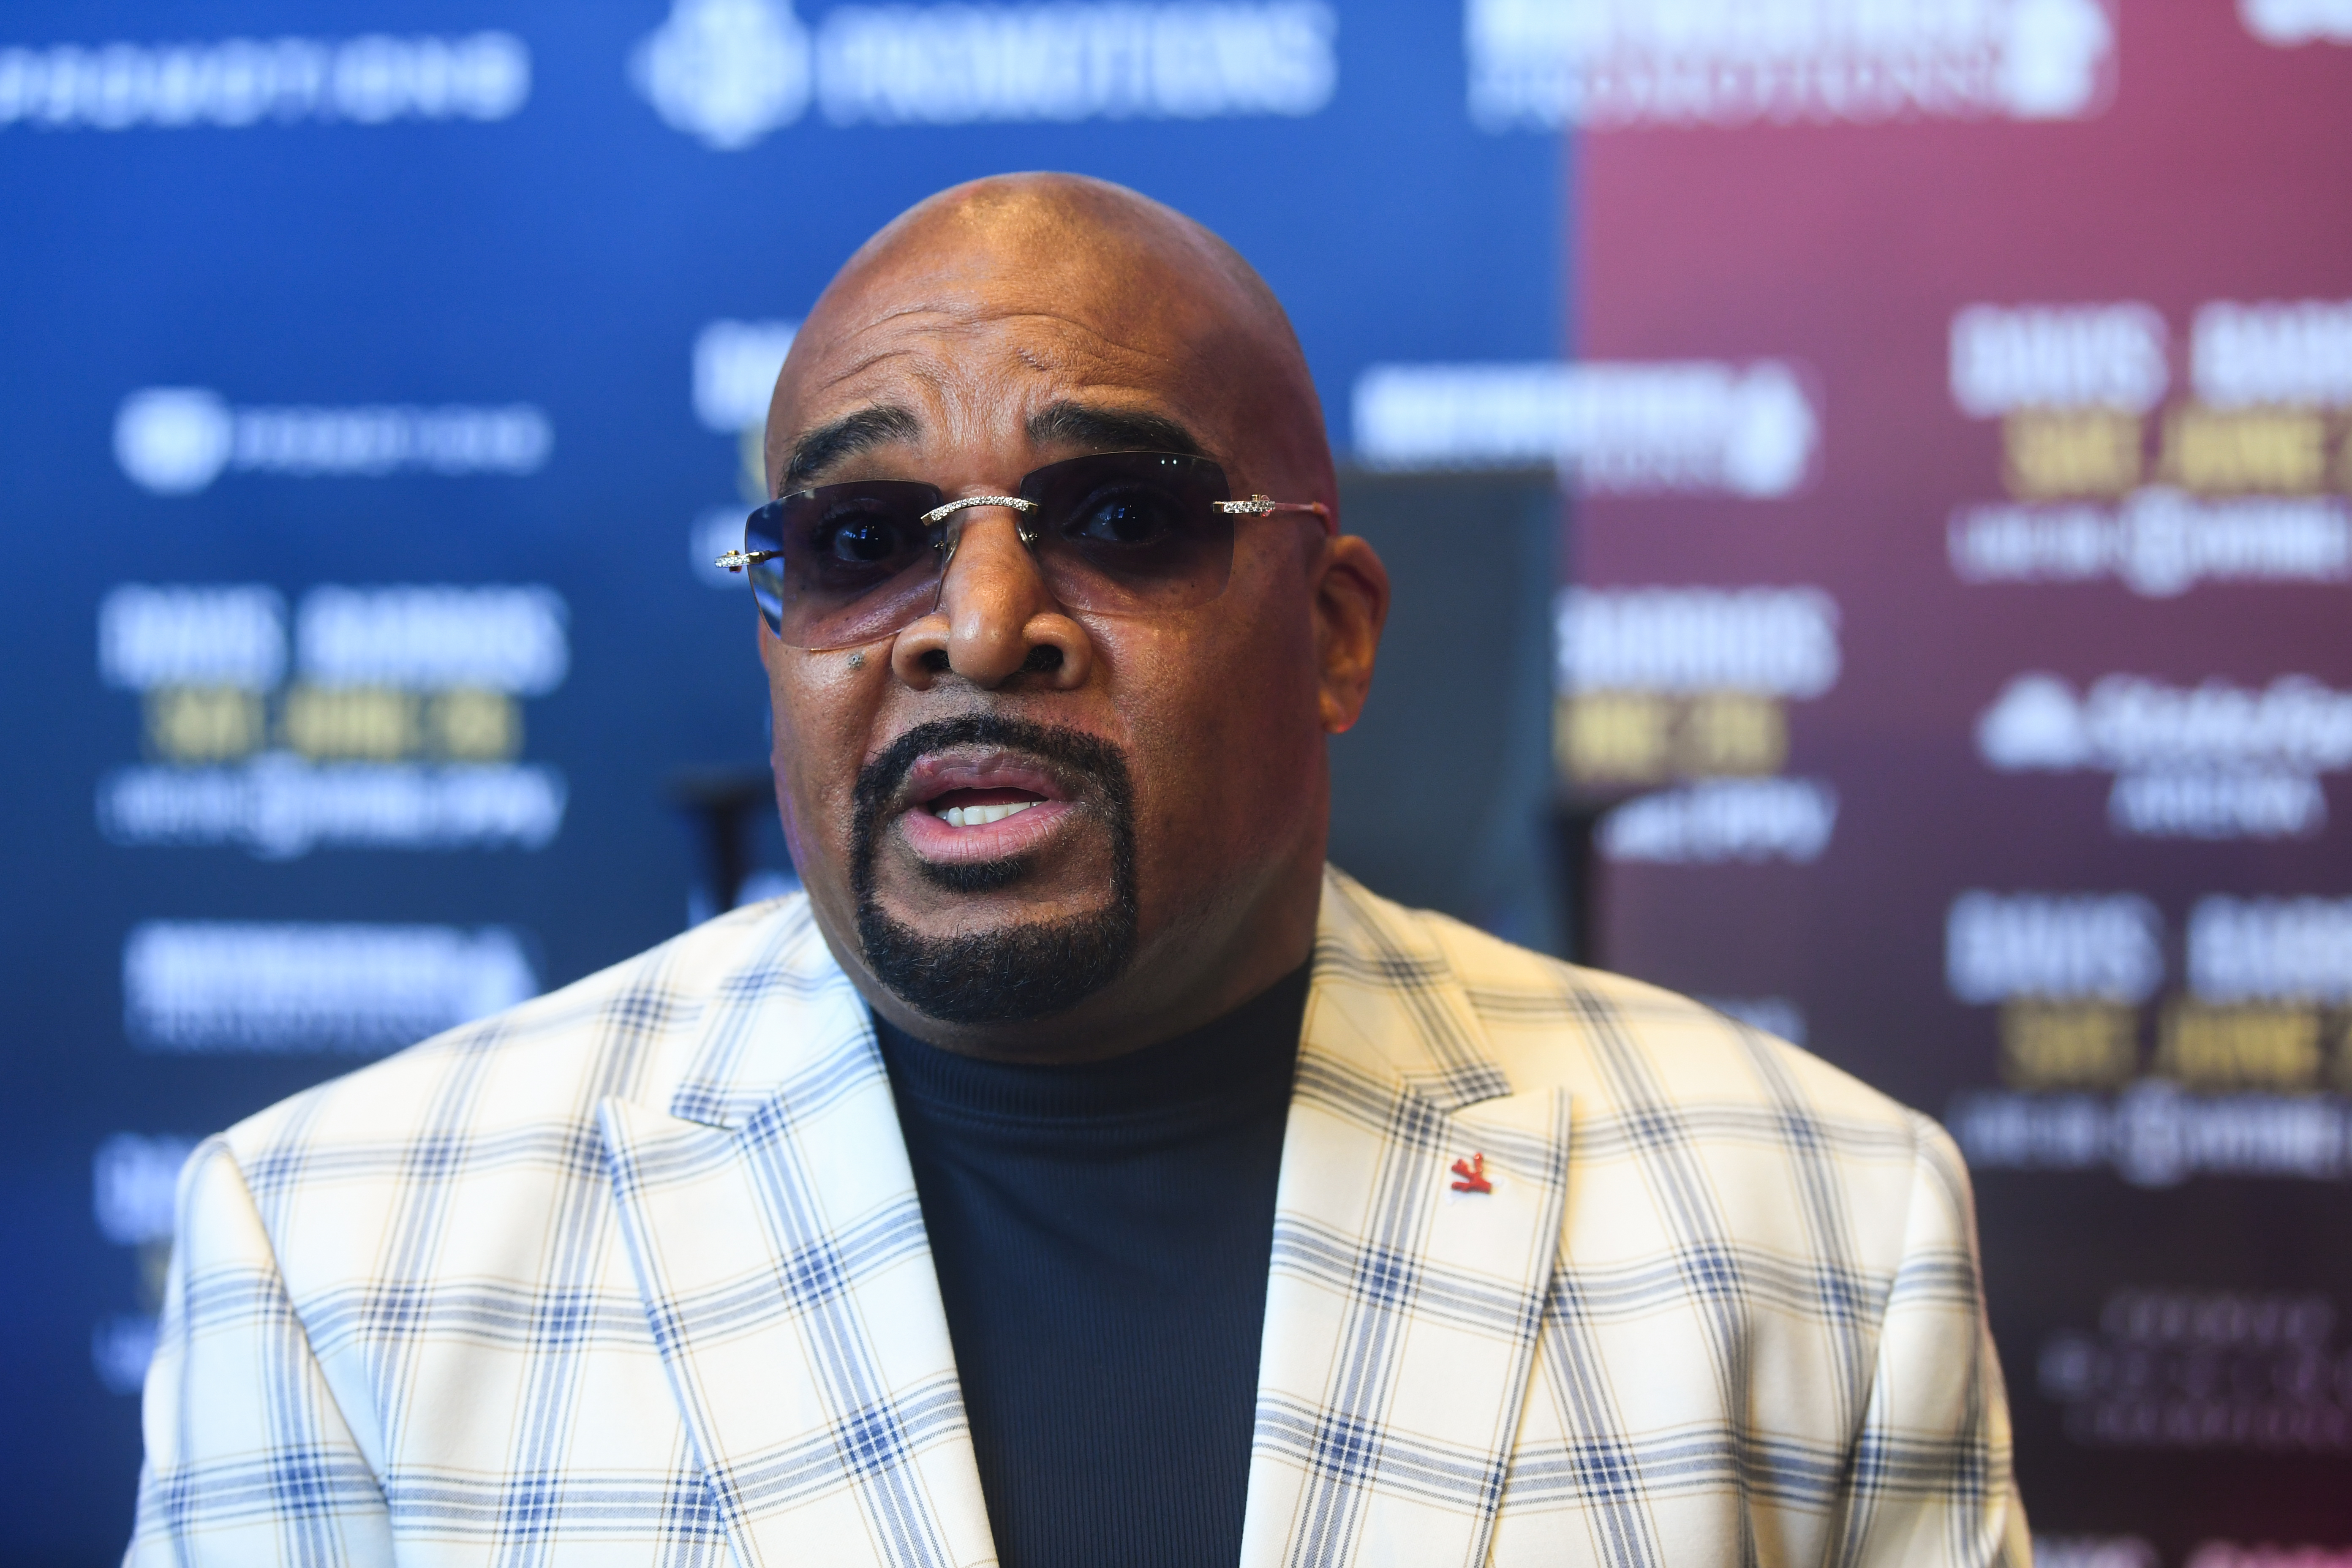 Ellerbe feels great about the job they’ve done for Davis and says the proof is in the pudding.